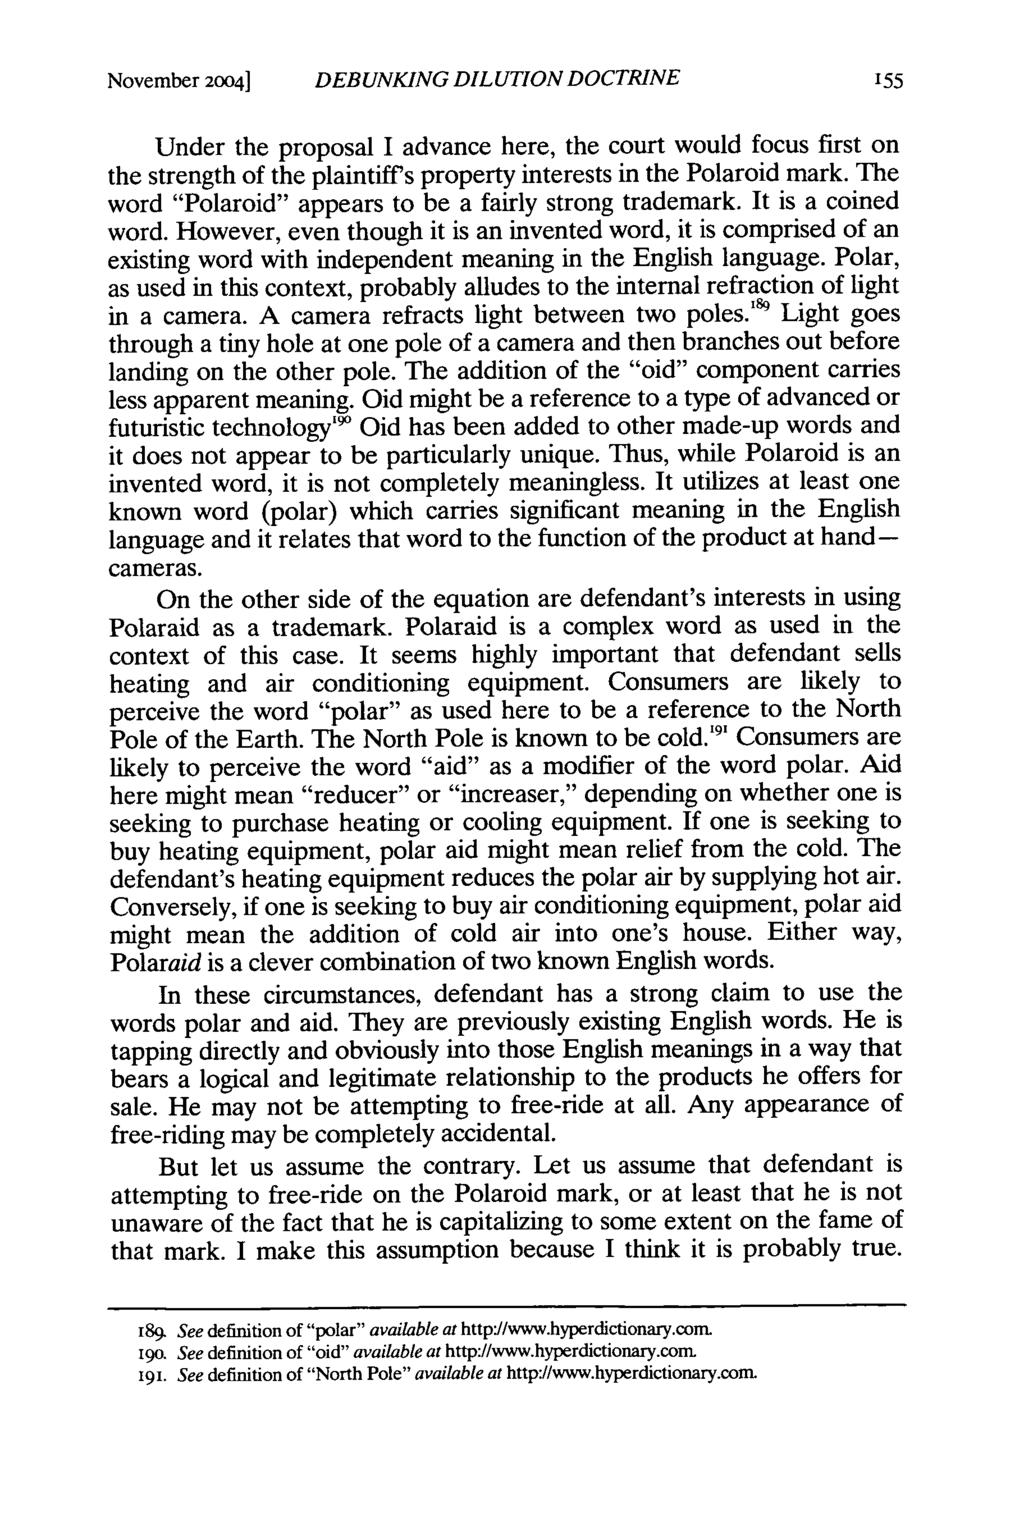 November 2004] DEBUNKING DILUTION DOCTRINE Under the proposal I advance here, the court would focus first on the strength of the plaintiff's property interests in the Polaroid mark.